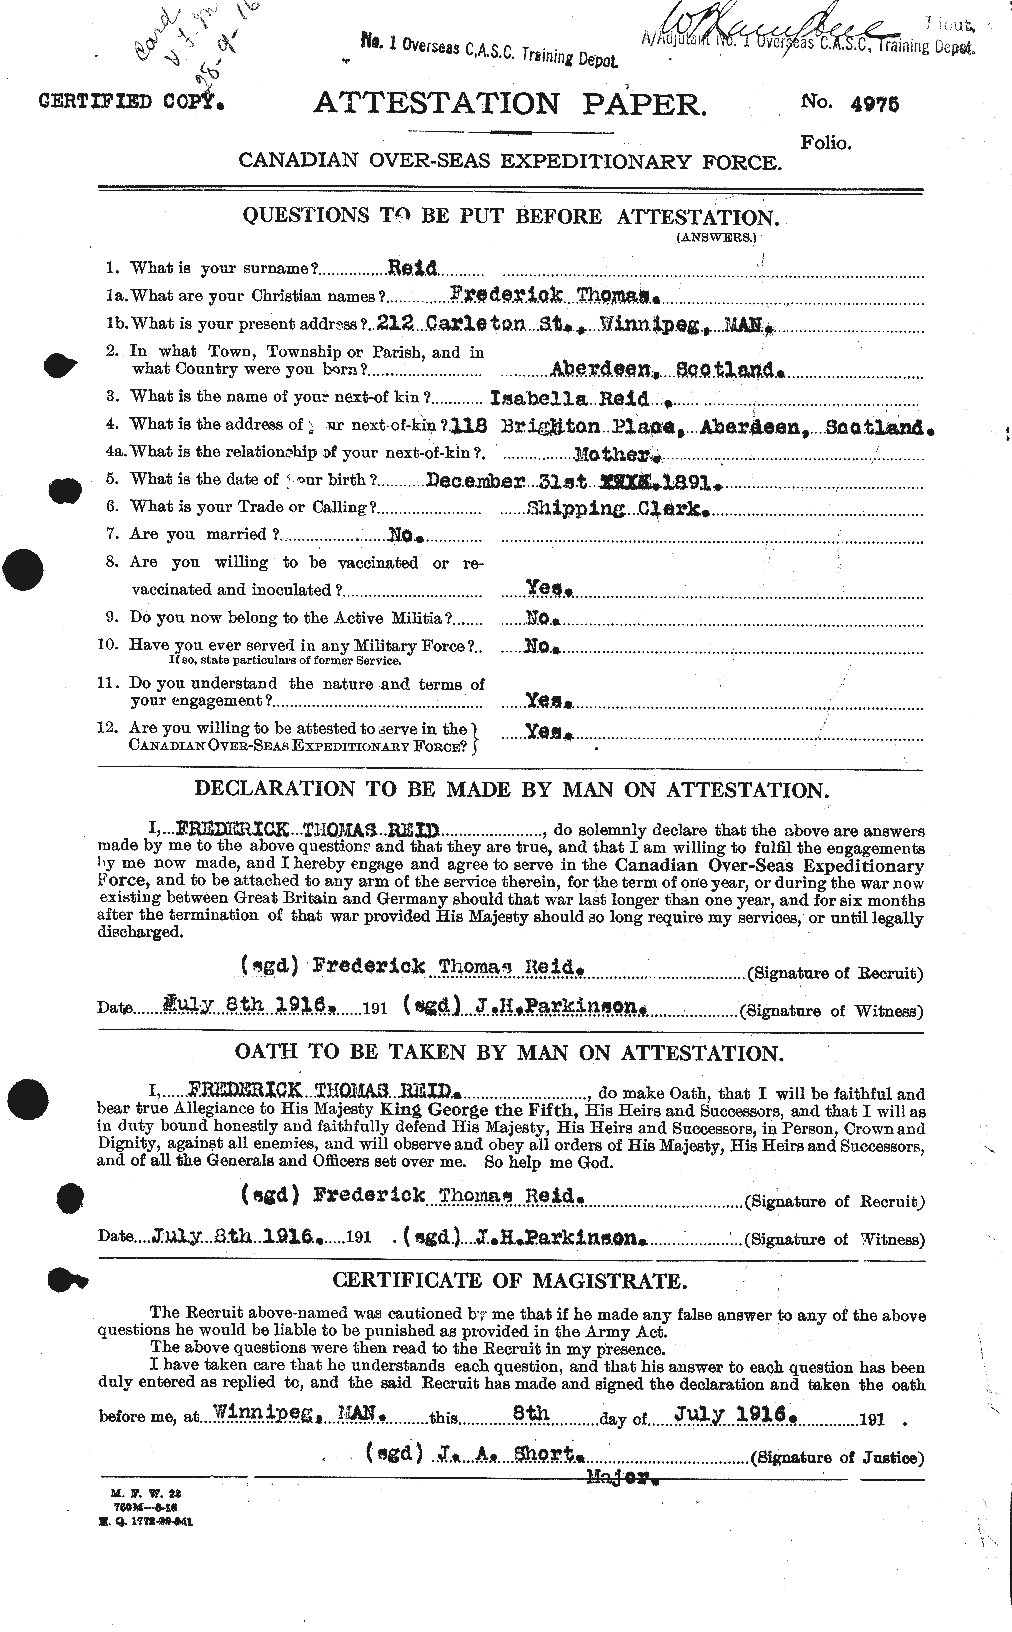 Personnel Records of the First World War - CEF 598074a